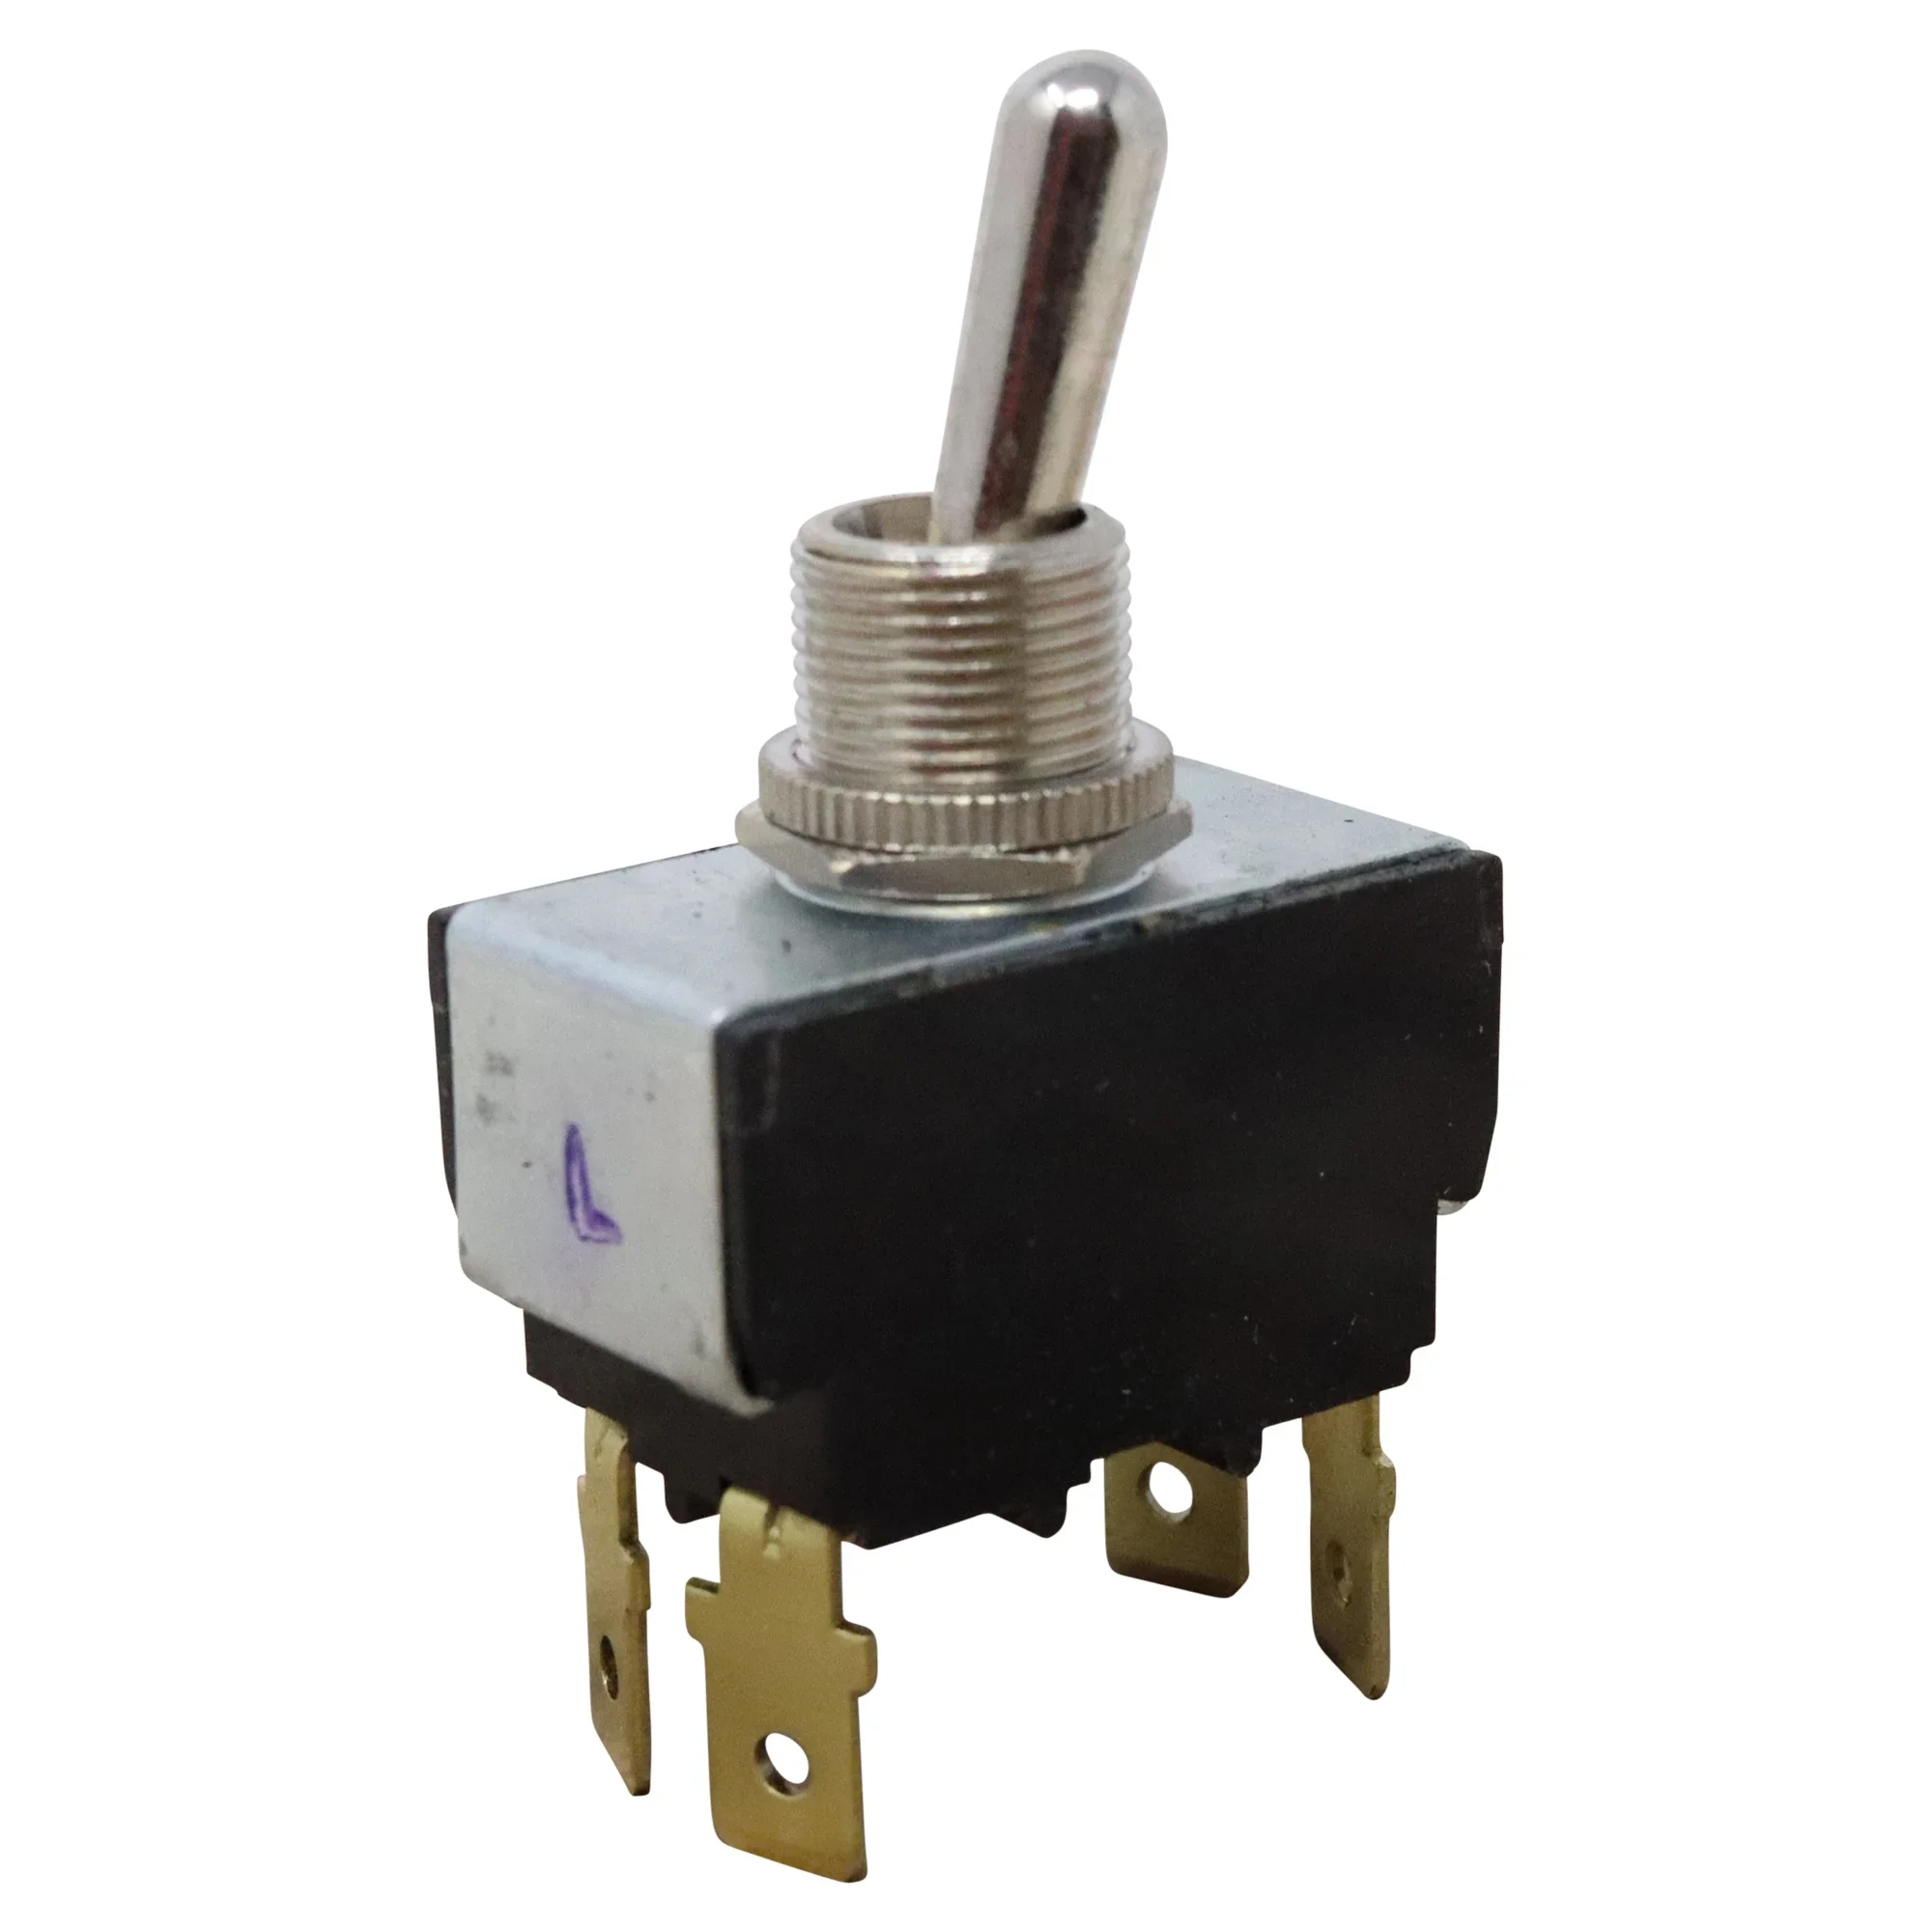 Wastebuilt® Replacement for Qwik-Tip Double Pole Single Throw (DPST) On/Off Toggle Switch